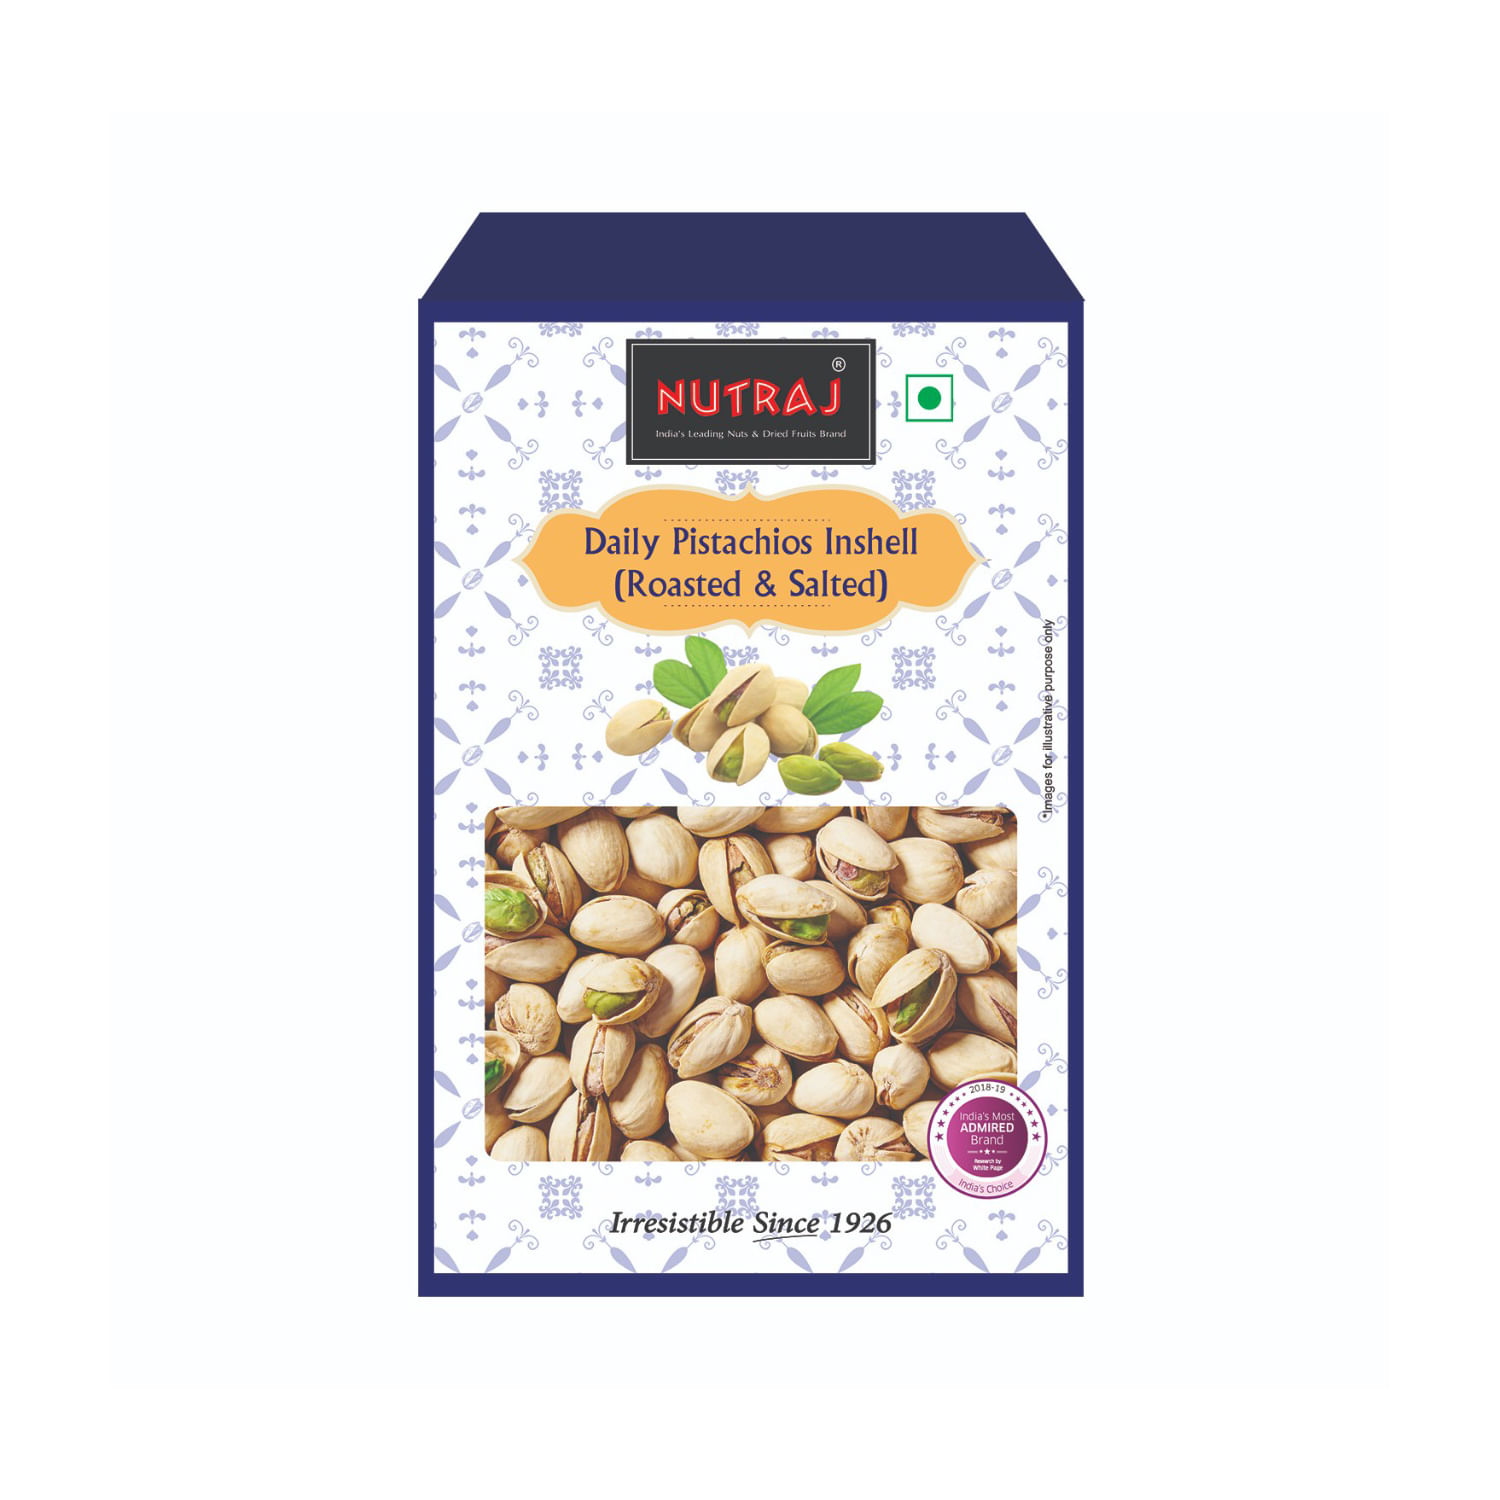 Nutraj Daily Pistachios In shell Roasted and Salted 1Kg (2 X 500g)